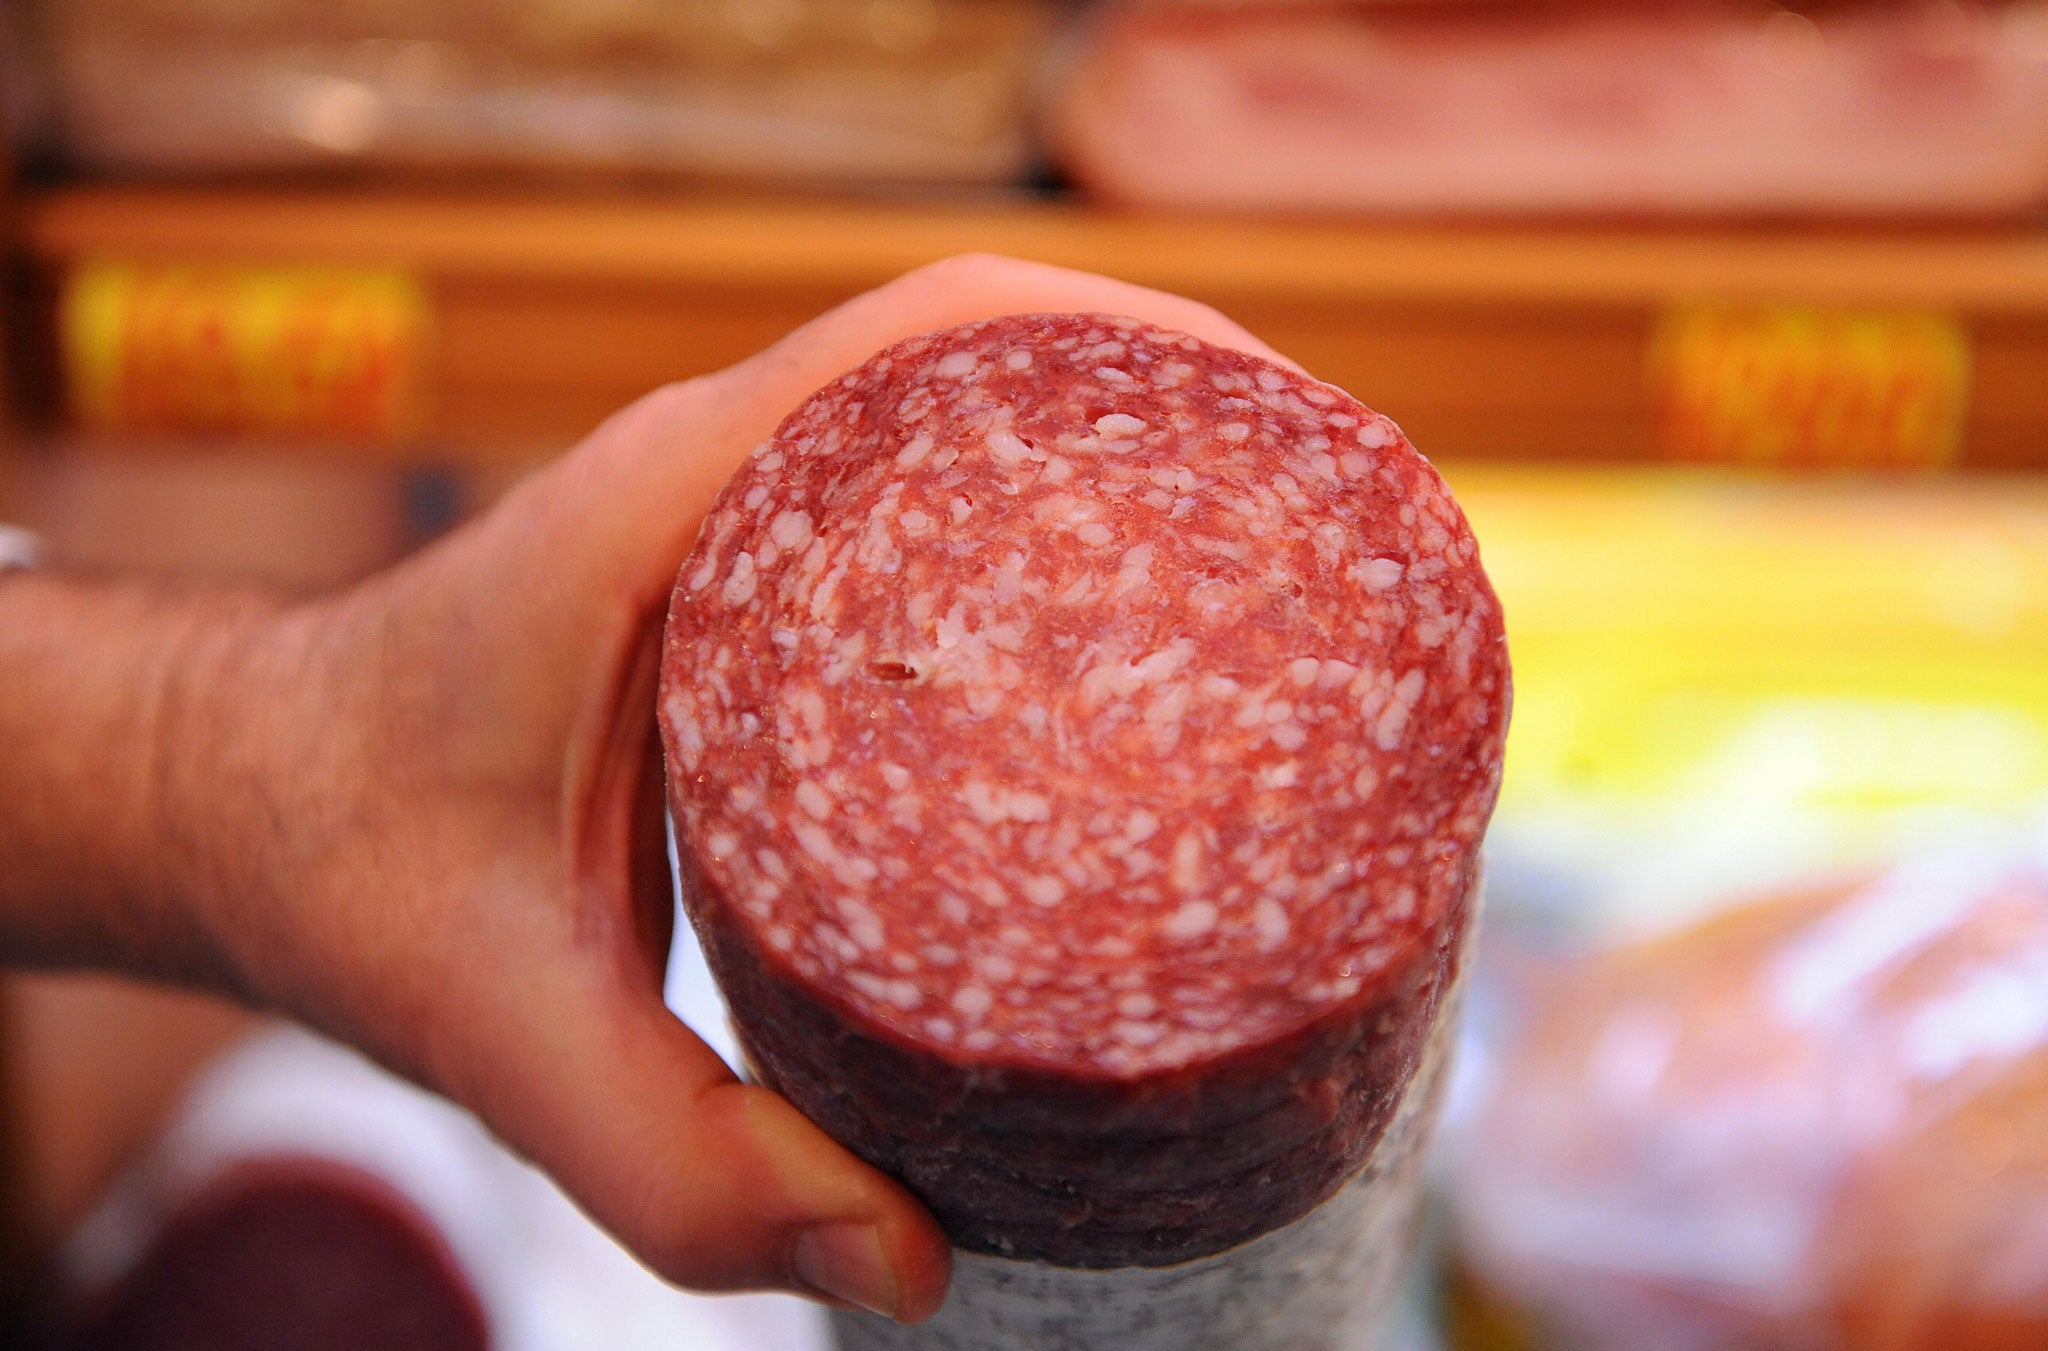 Budget cuts so far have mainly consisted of “salami slicing”, says the Institute for Government think tank